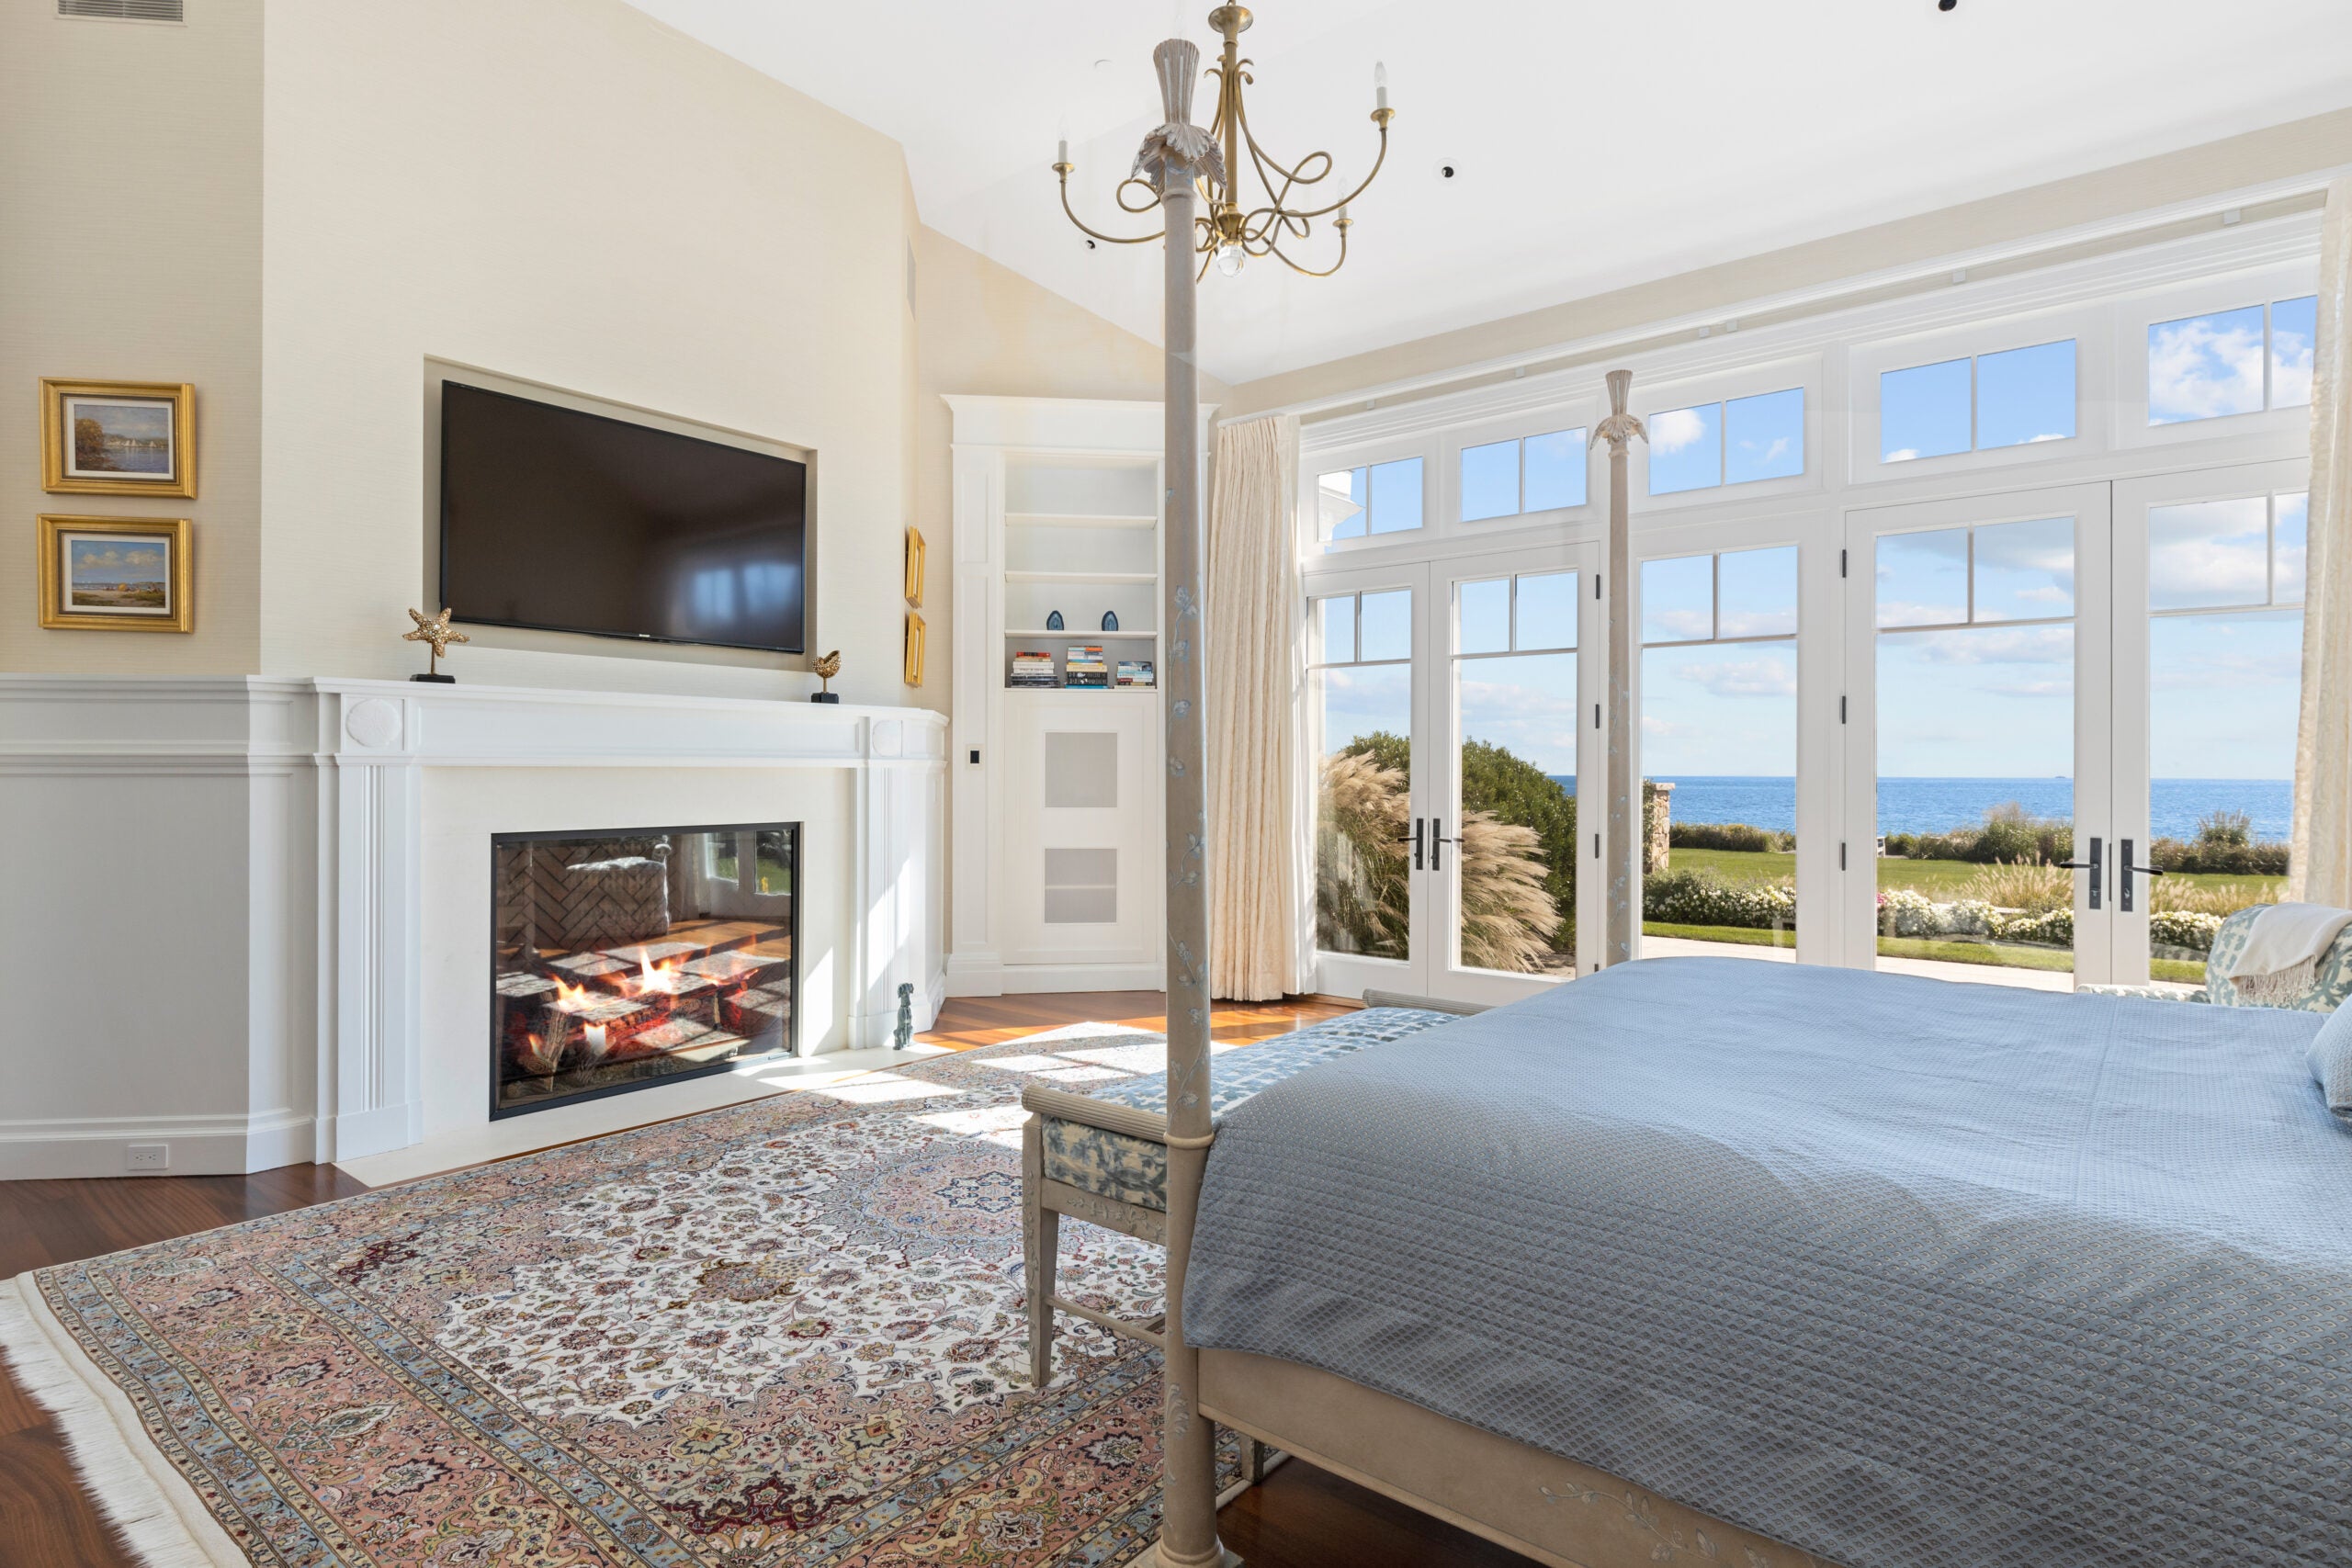 A four-poster bed with blue linens sits before three glass doors to a patio, as well as a gas fireplace framed in white. An Oriental rugs sits between the fireplace and the bed.